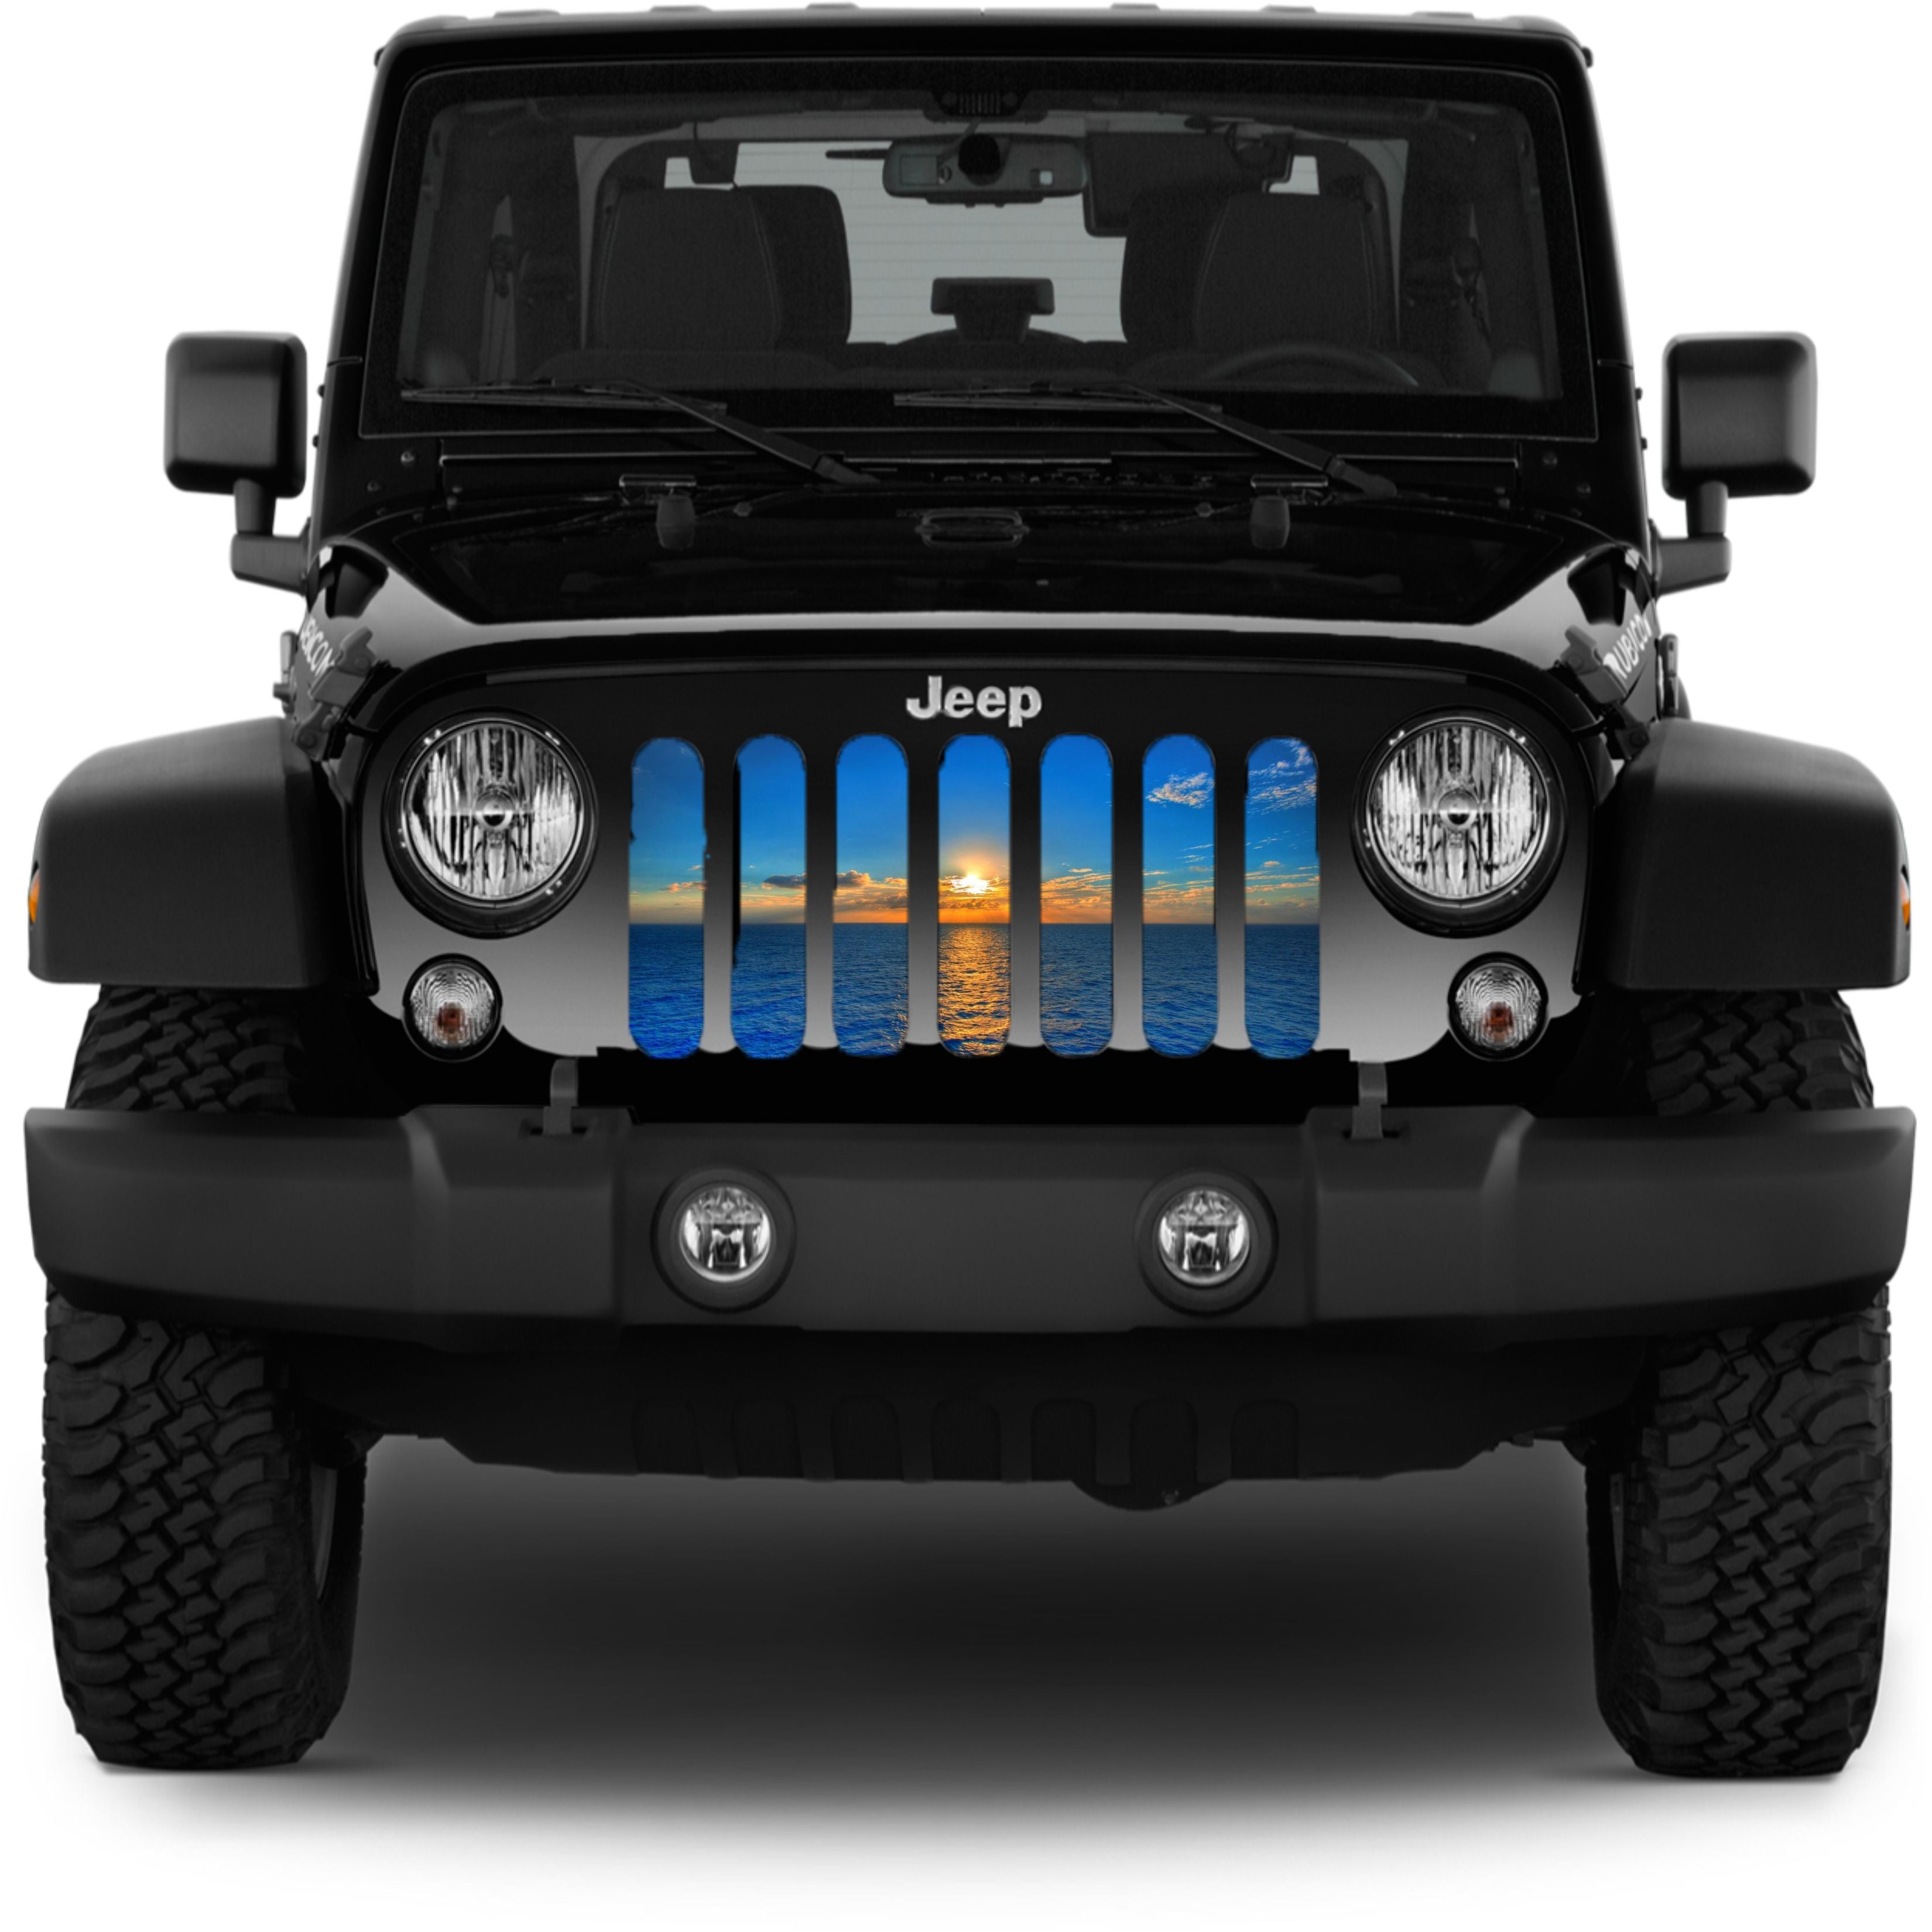 Sunset or Sunrise on the Water Grille Insert for Jeep